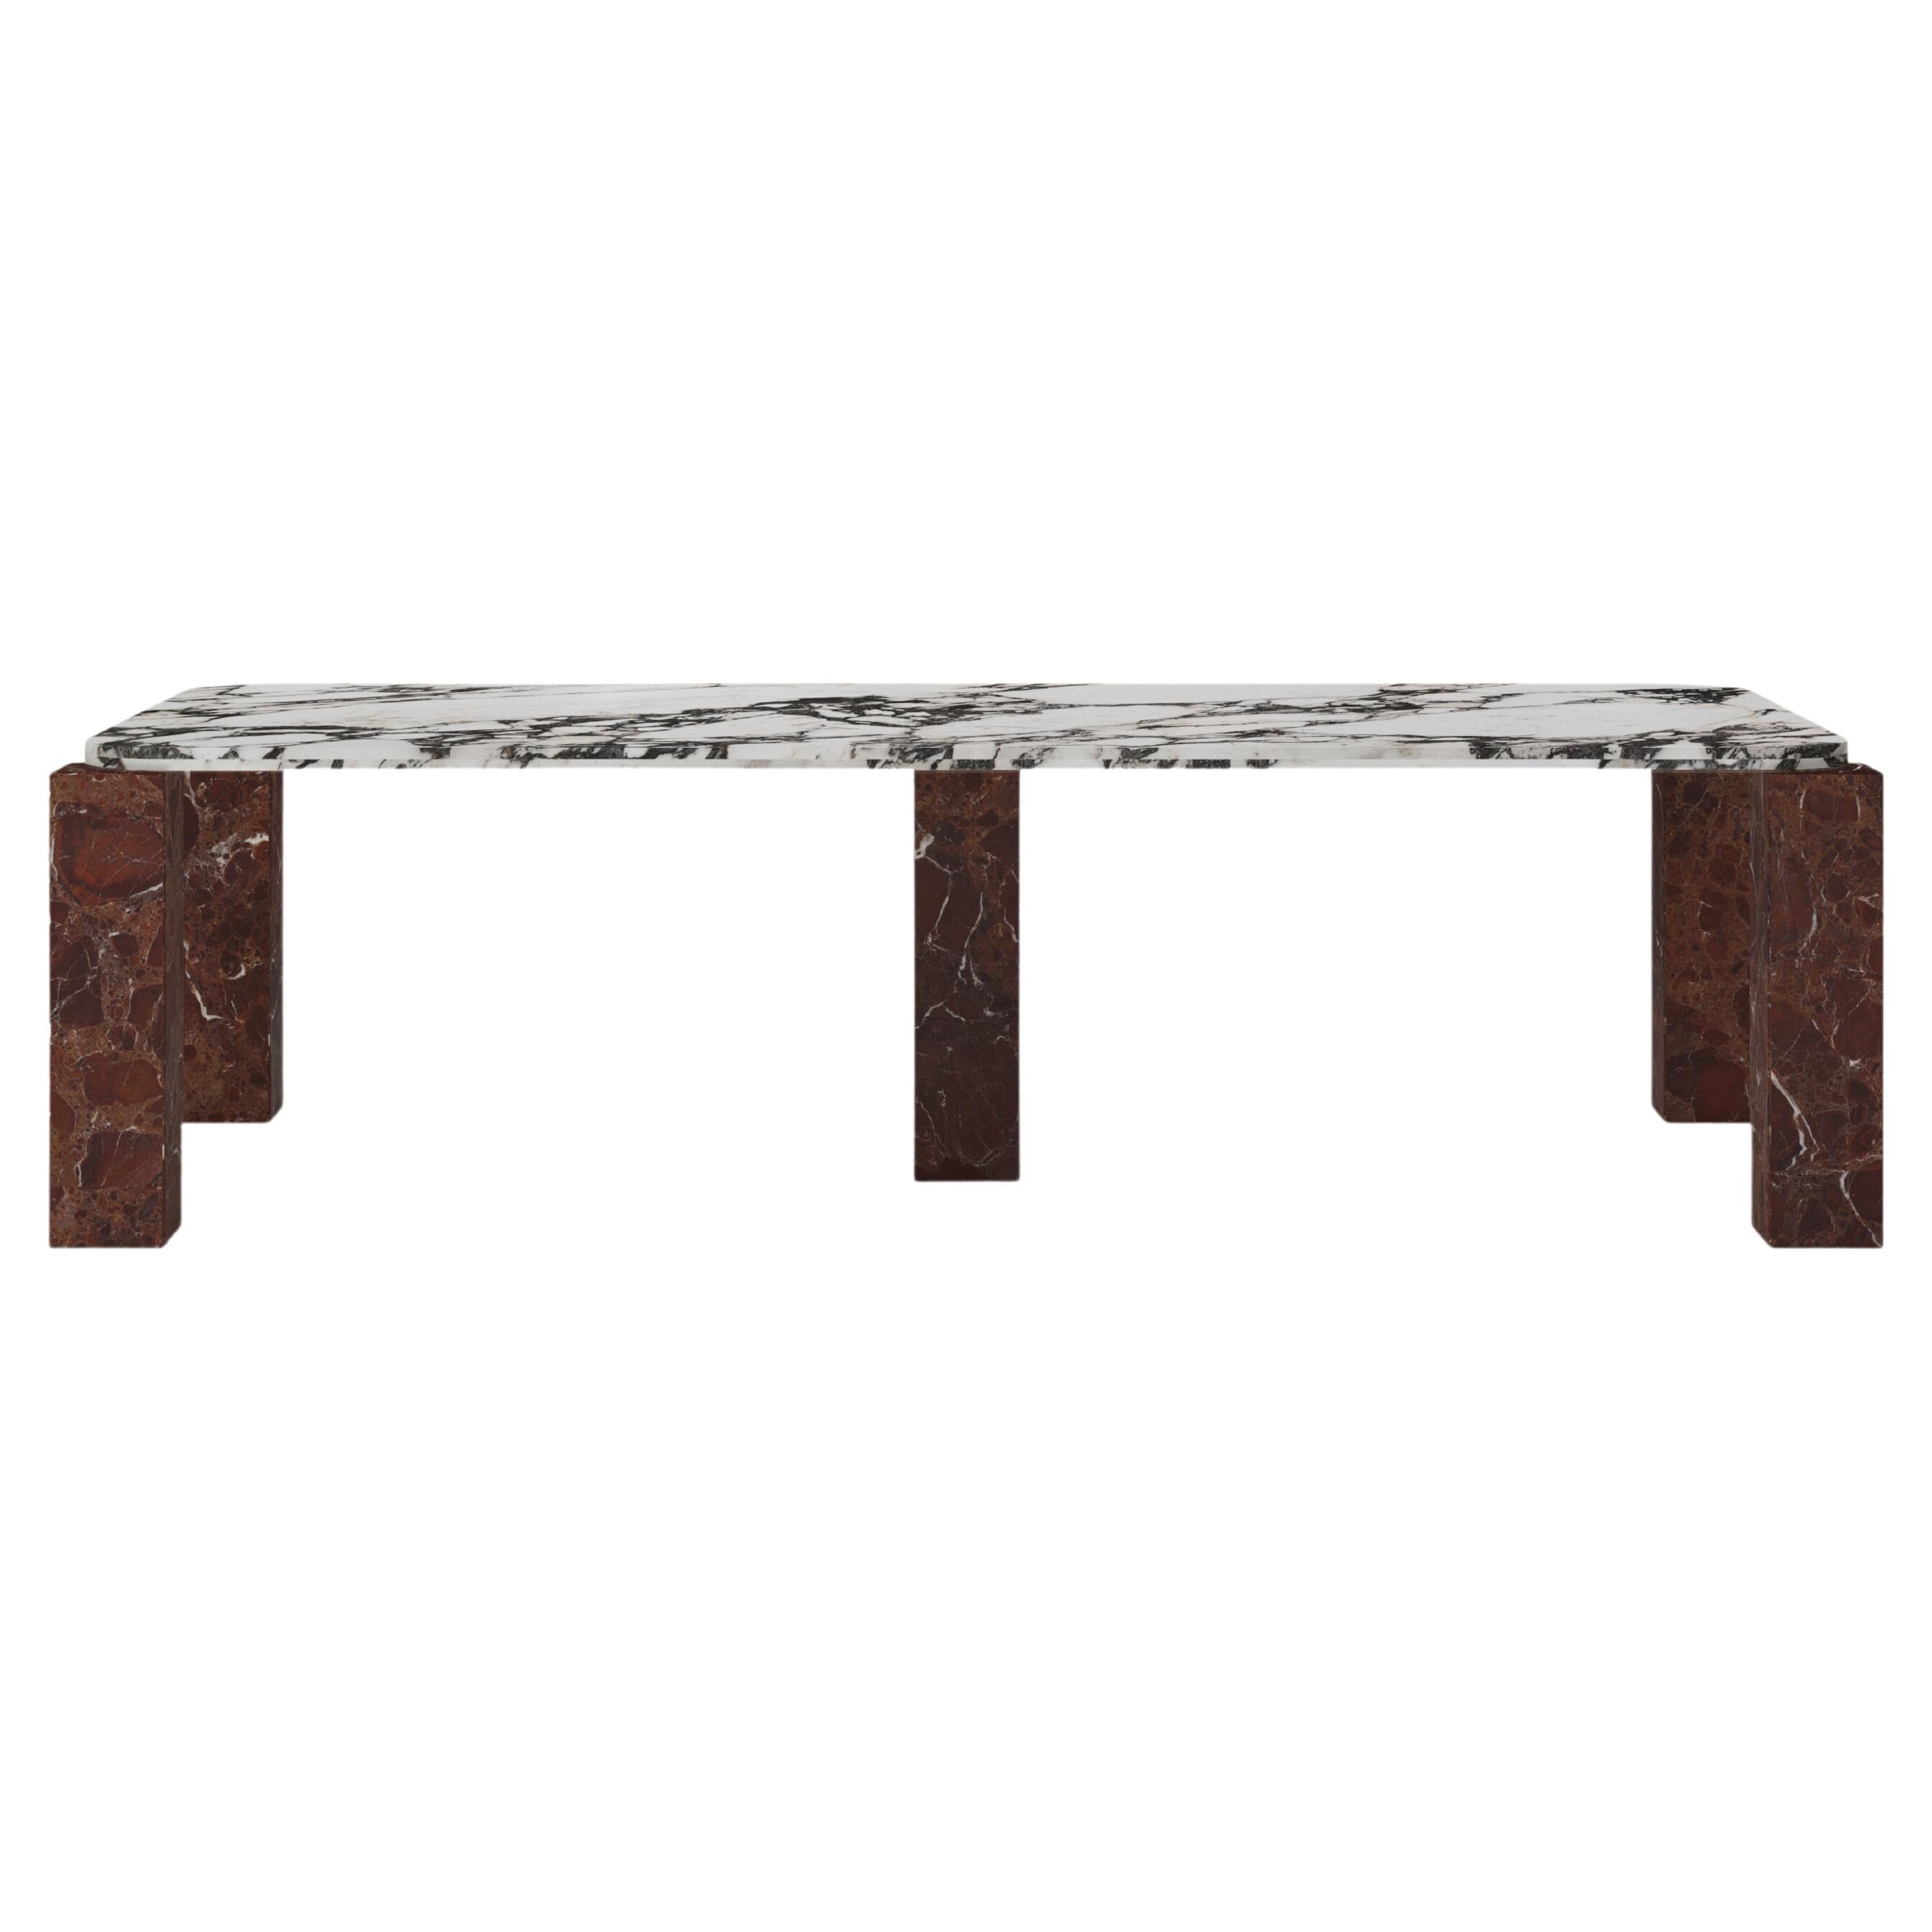 FORM(LA) Cubo Rectangle Dining Table 120”L x 50”W x 30”H Viola & Rosso Marble For Sale